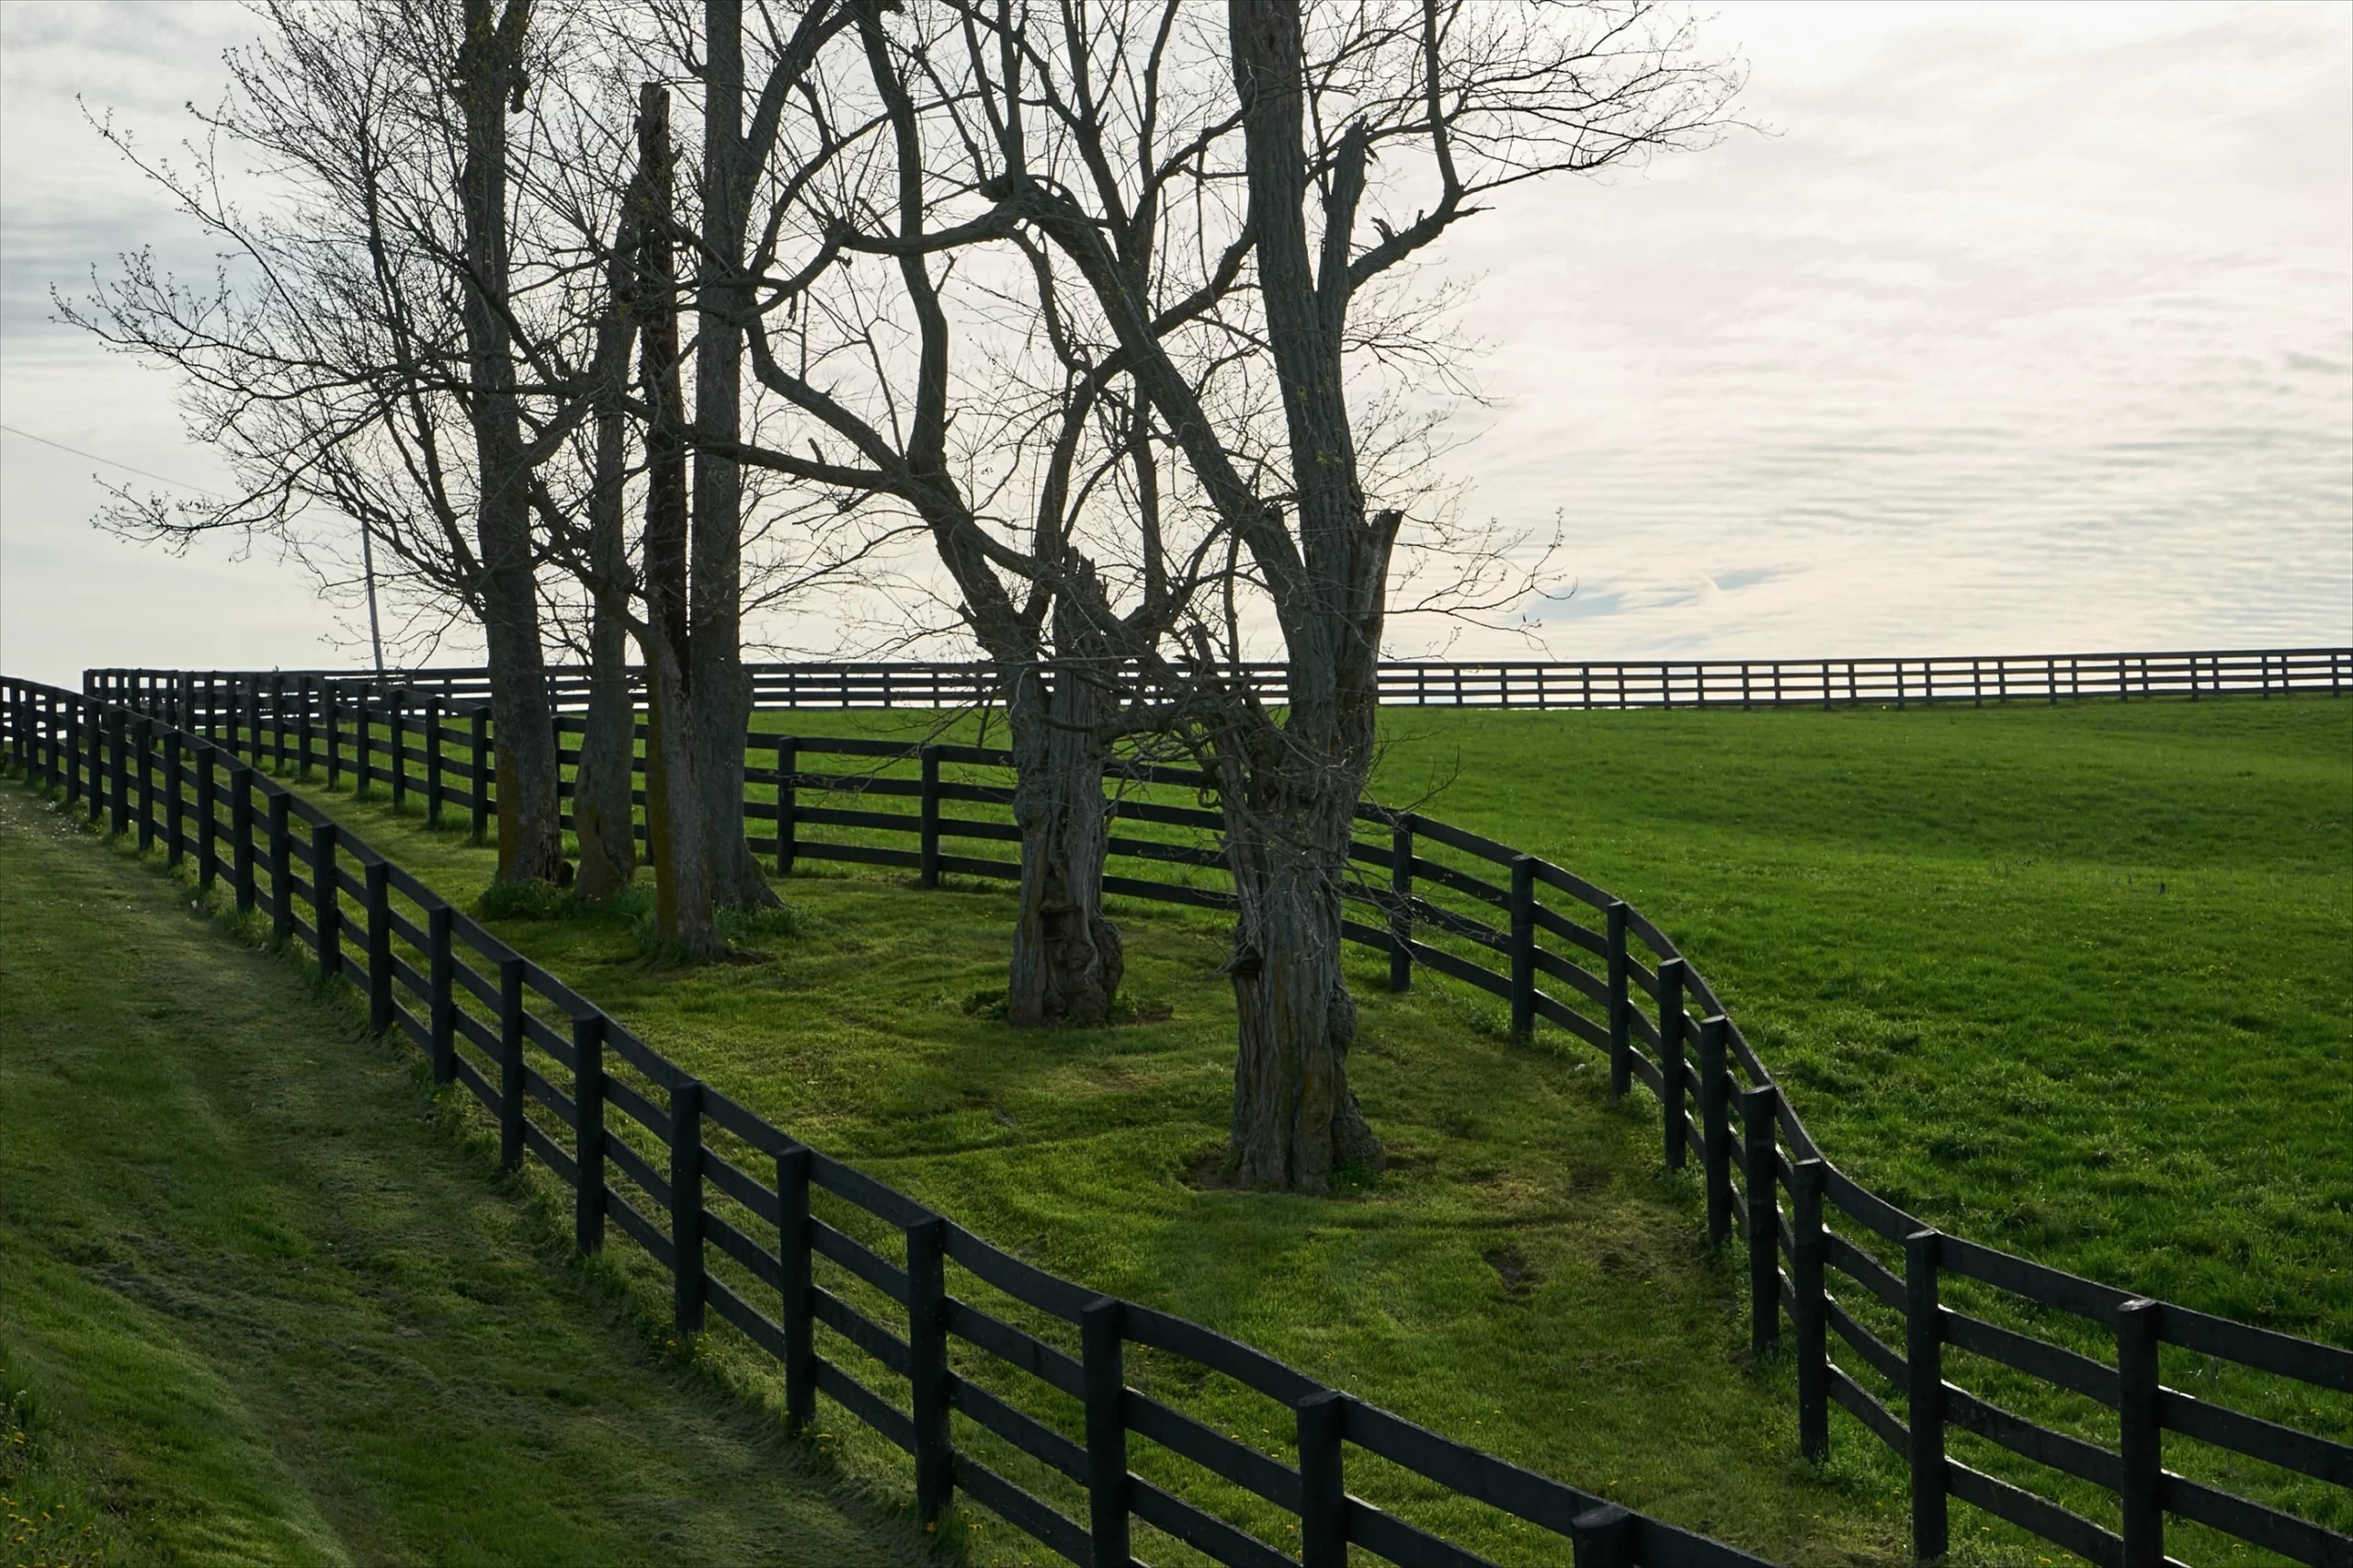 Kentucky, USA Published on February 26, 2021 SONY, ILCE-7M2 Free to use under the Unsplash License Field of horse dreams